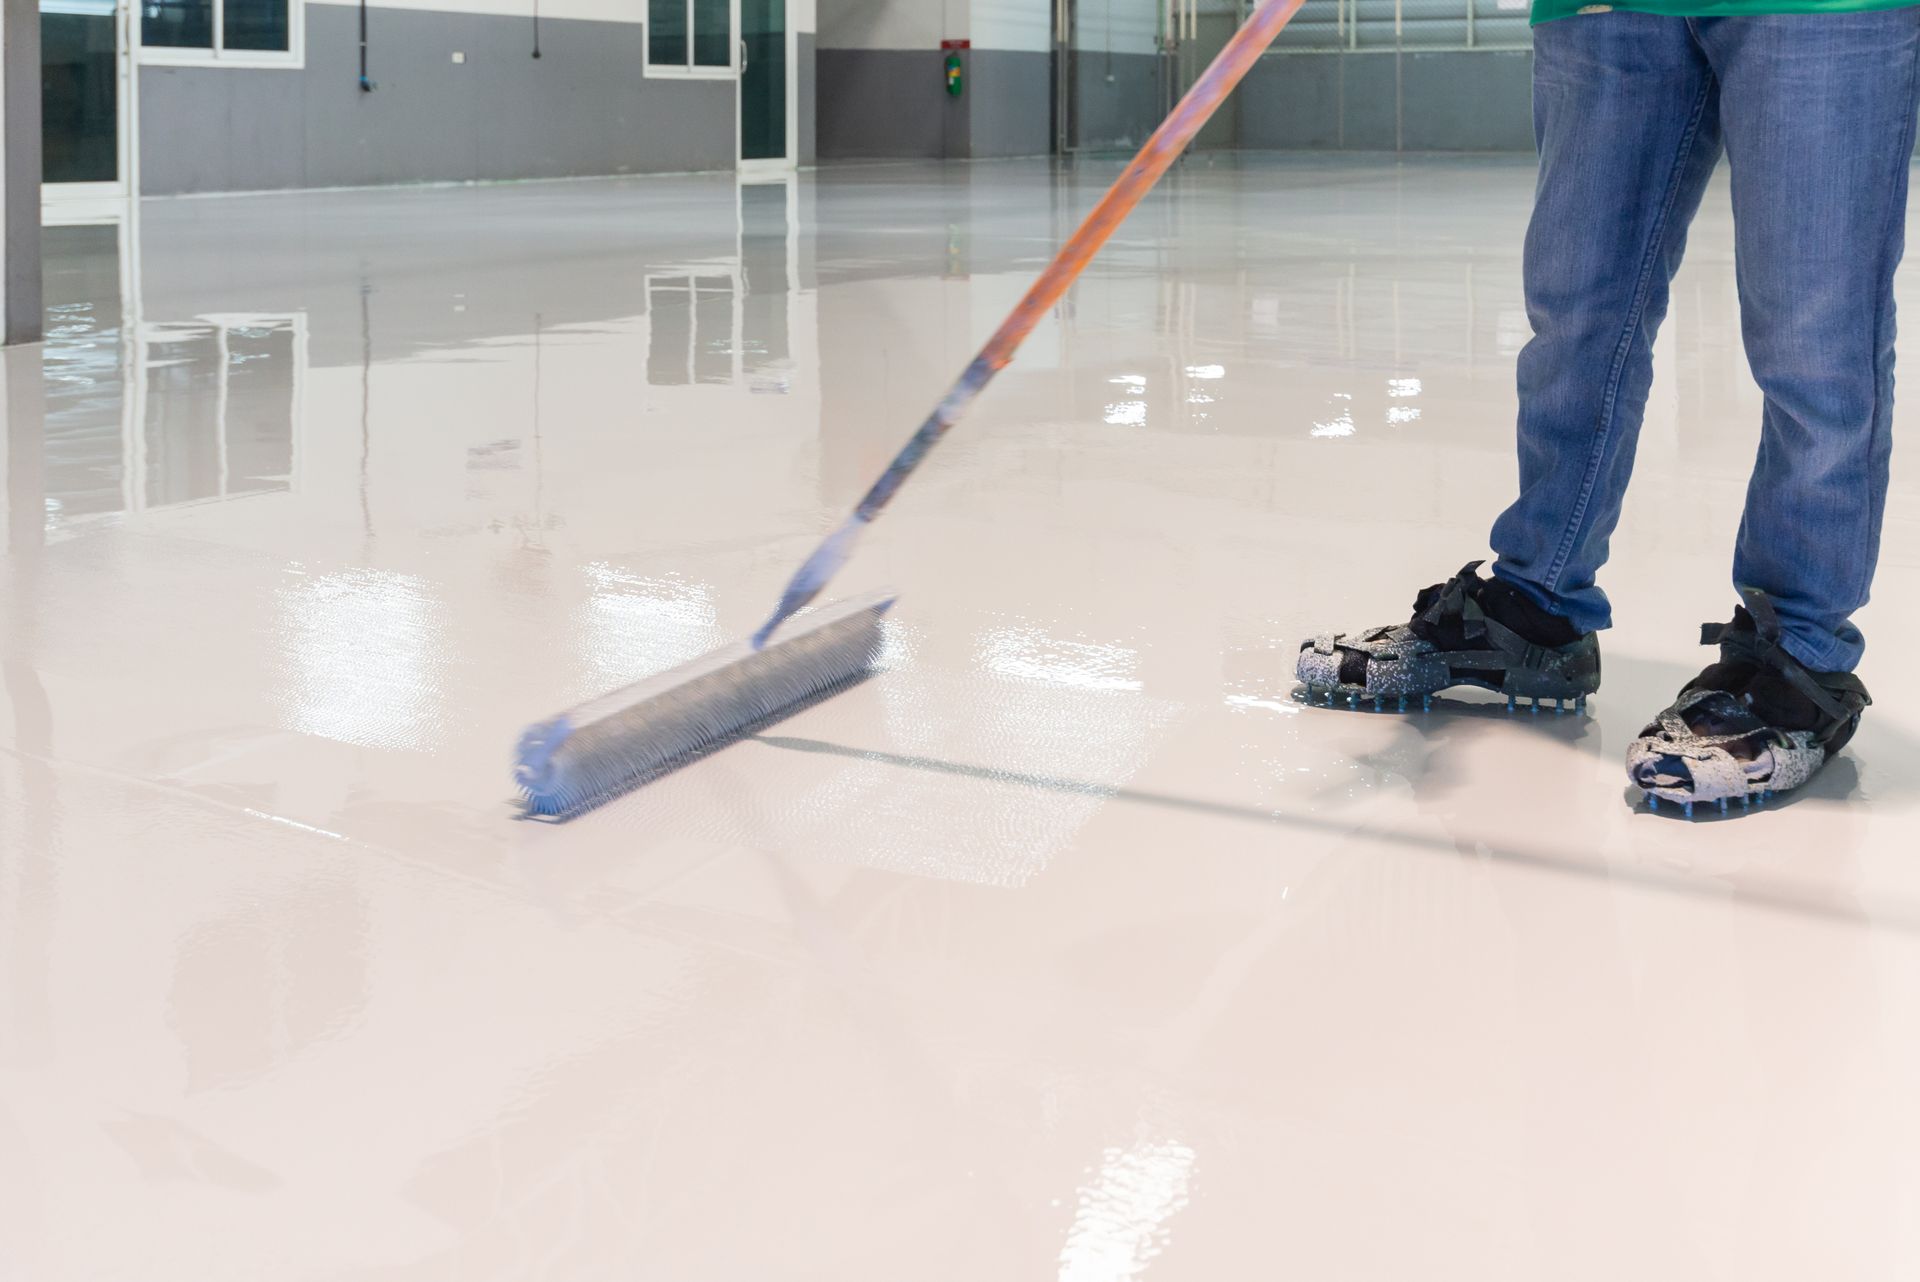 A person is cleaning a concrete floor with a broom.